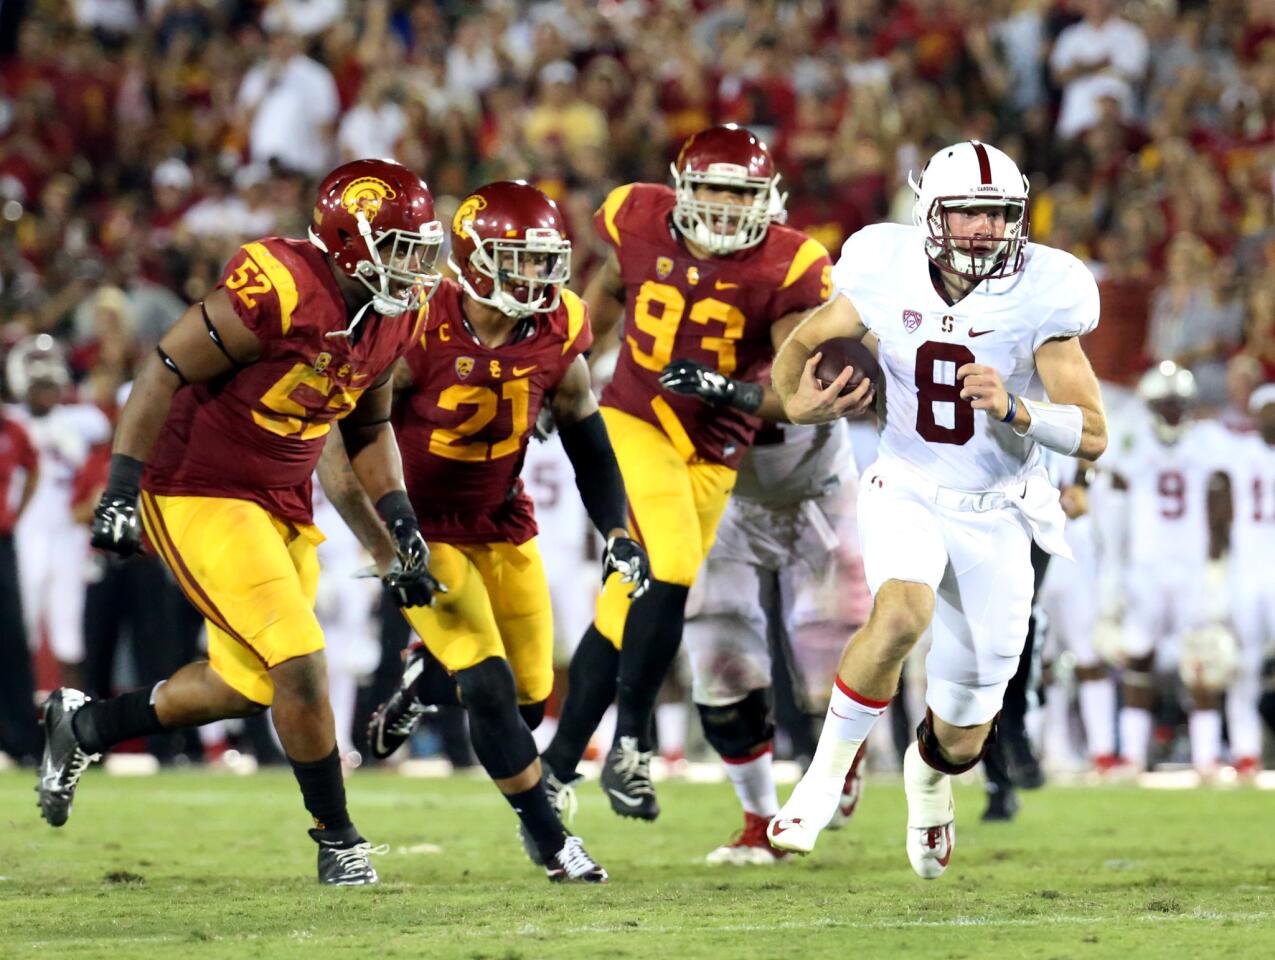 USC-Stanford battle in Pac-12 title game figures to be won in the trenches